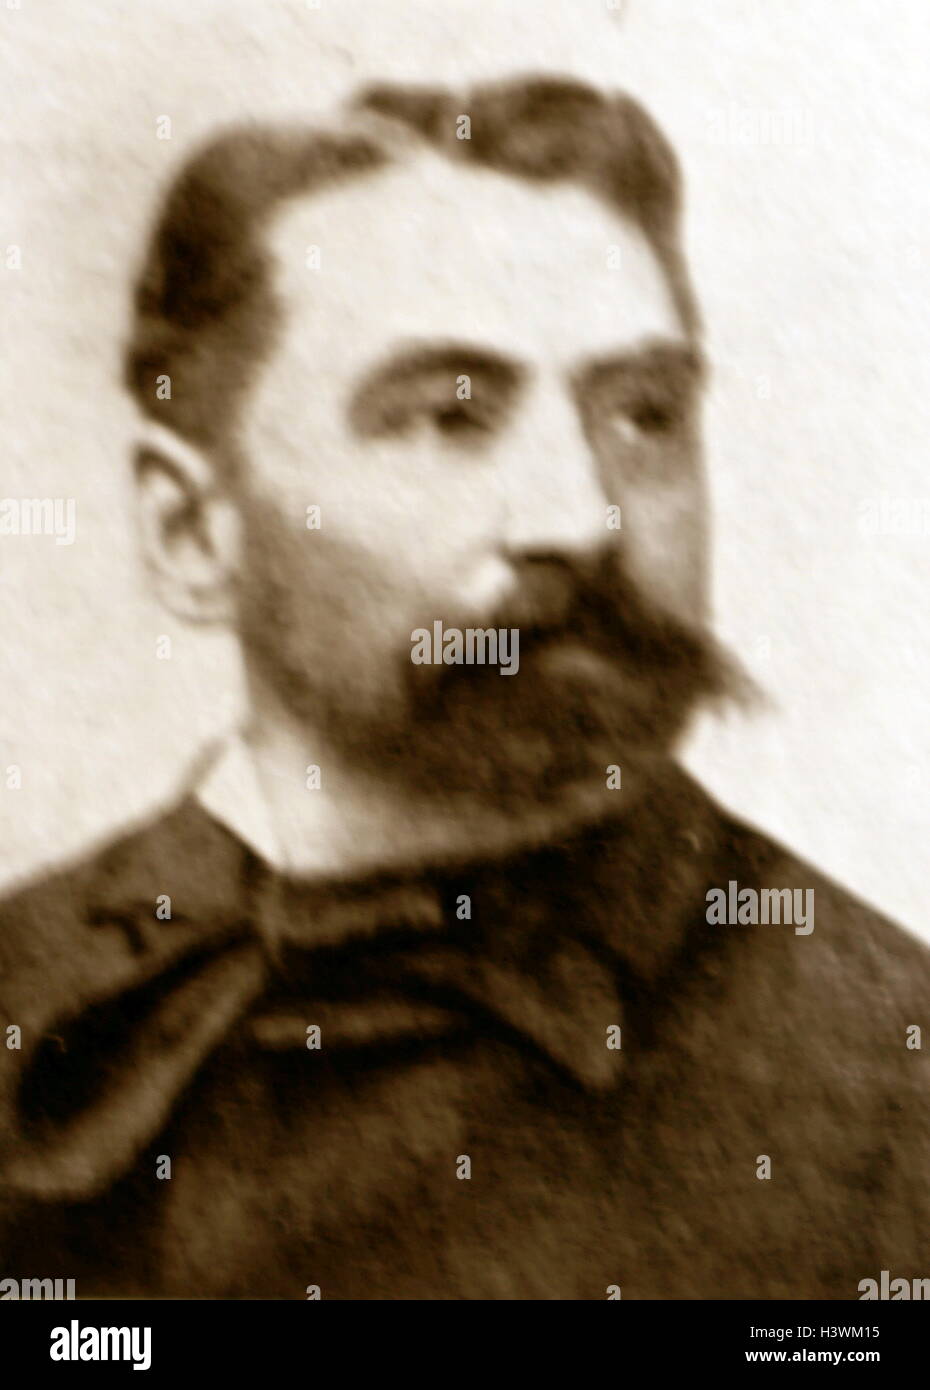 Photograph of Stéphane Mallarmé (1842-1898) a French poet and critic. Dated 19th Century Stock Photo